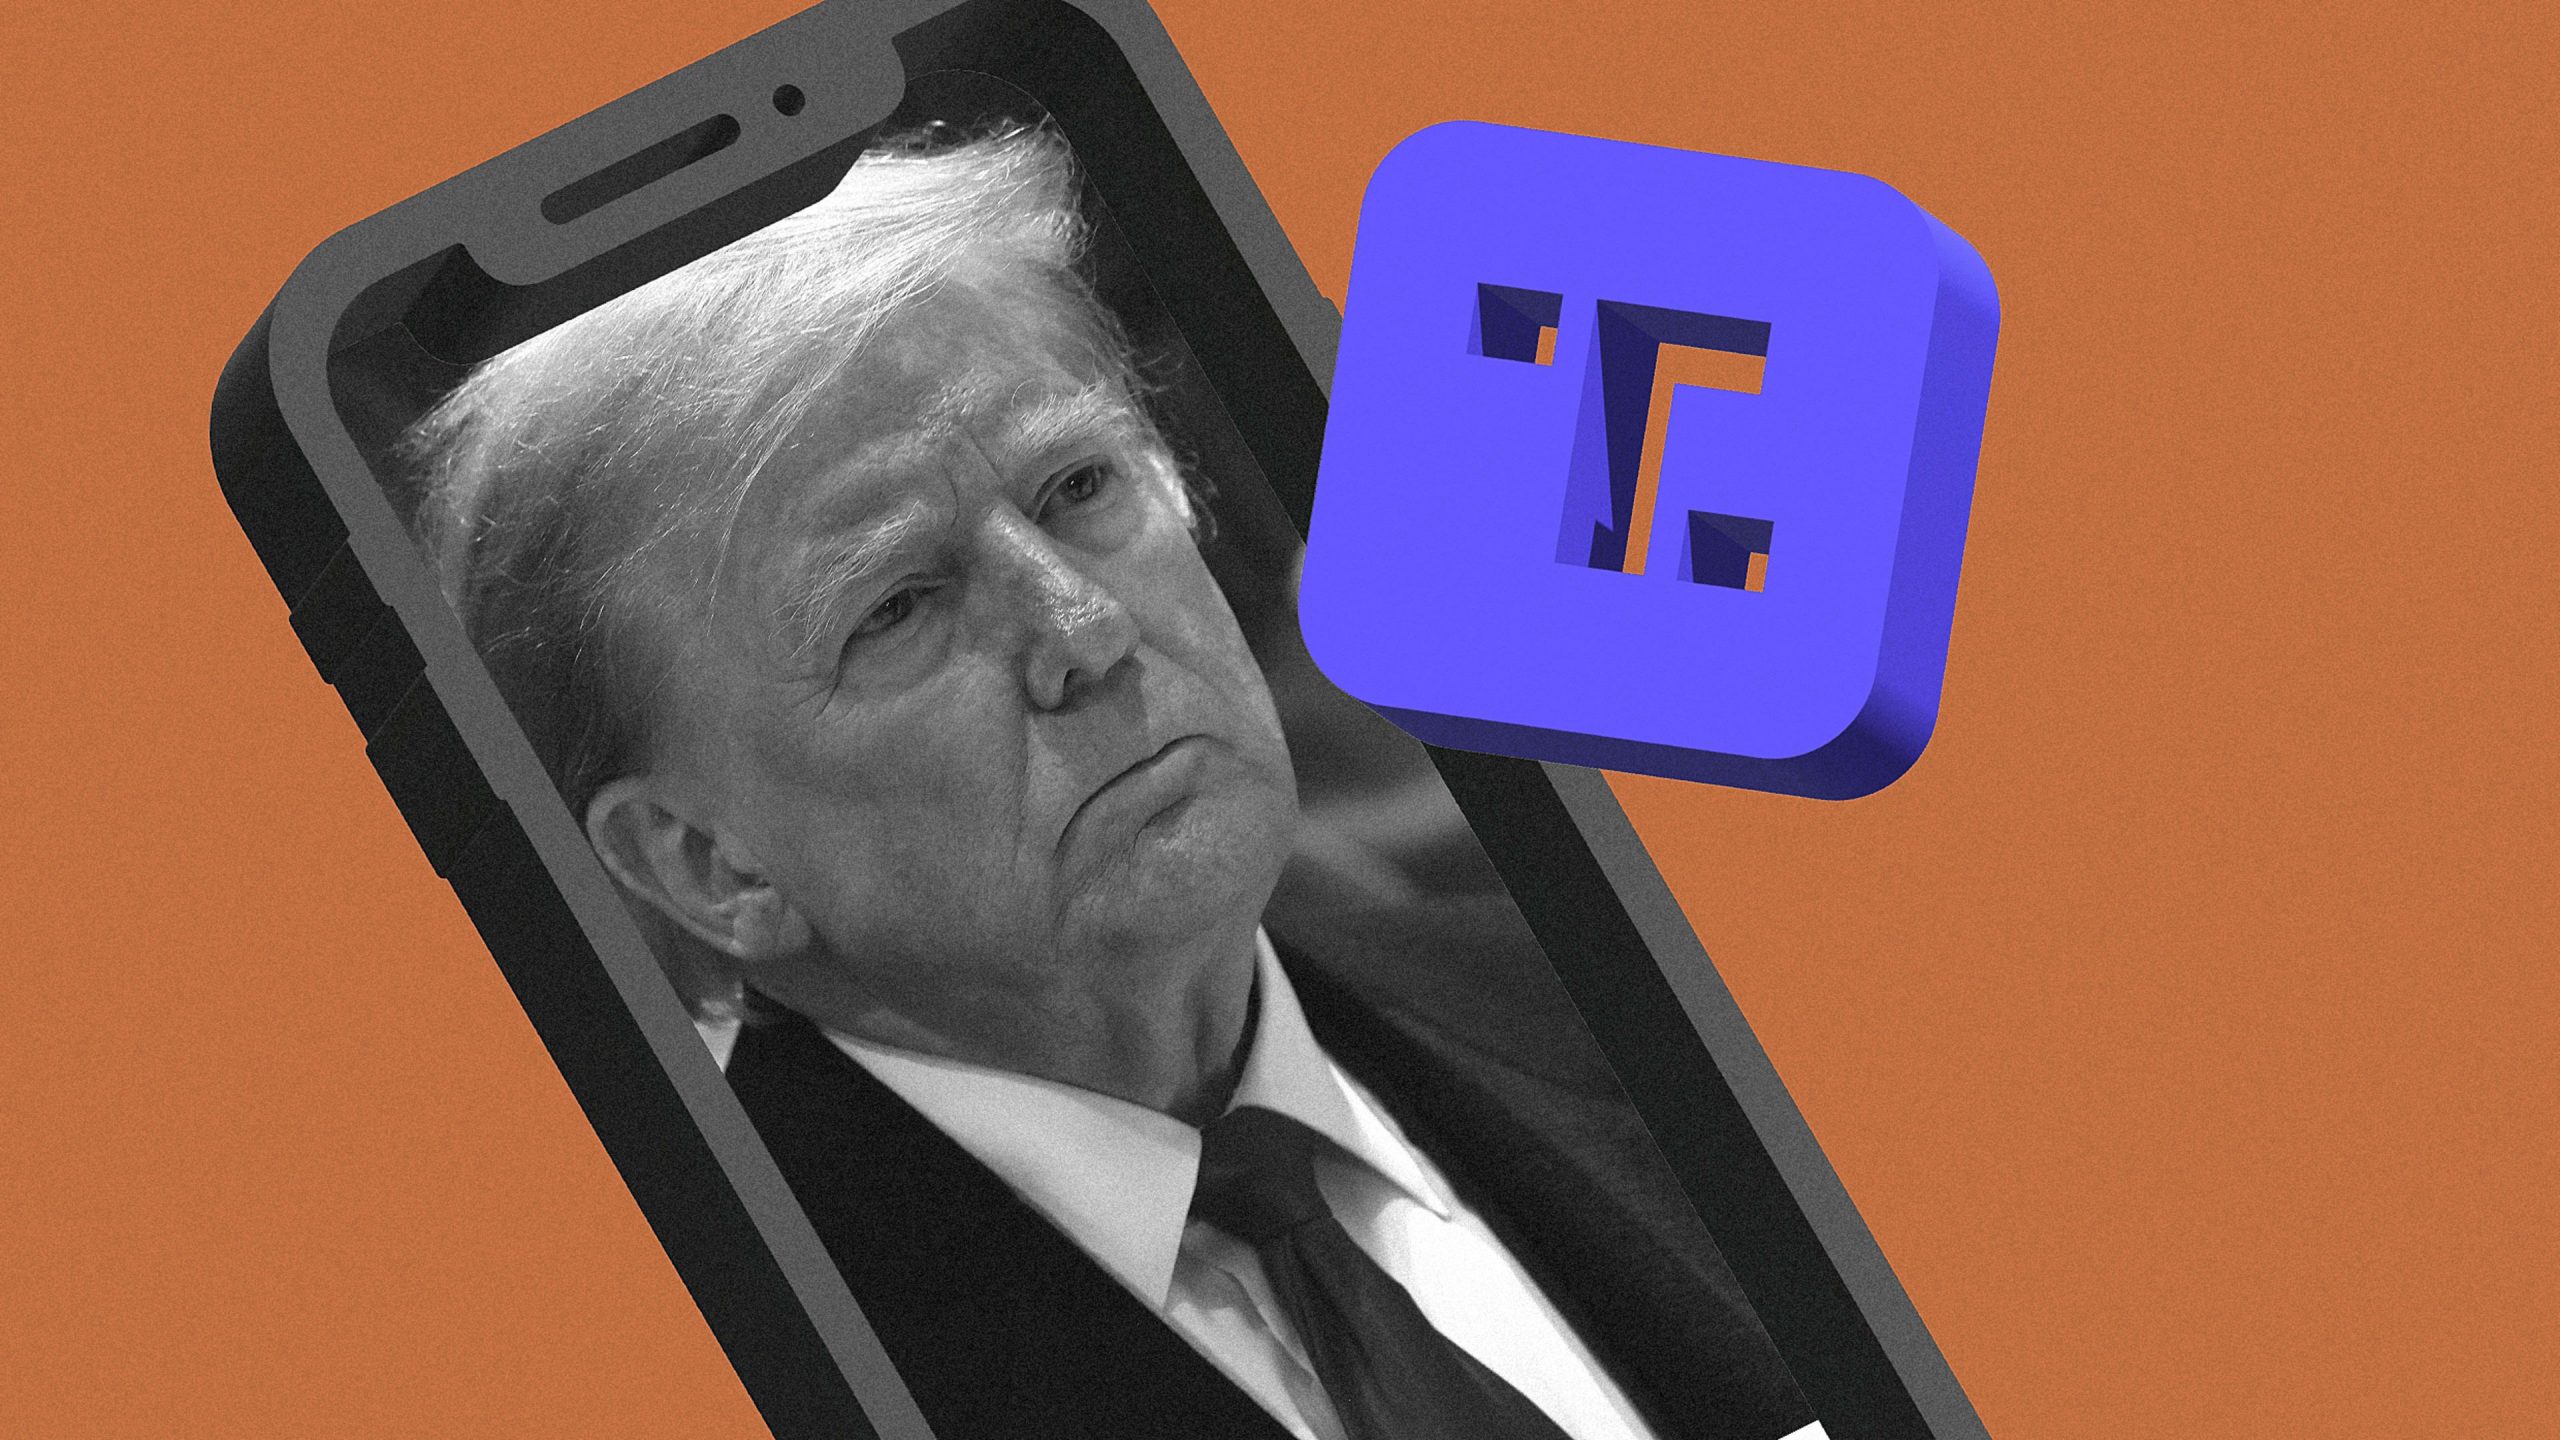 Truth Social, Trump’s conservative social media platform, is now public. Here’s how it works